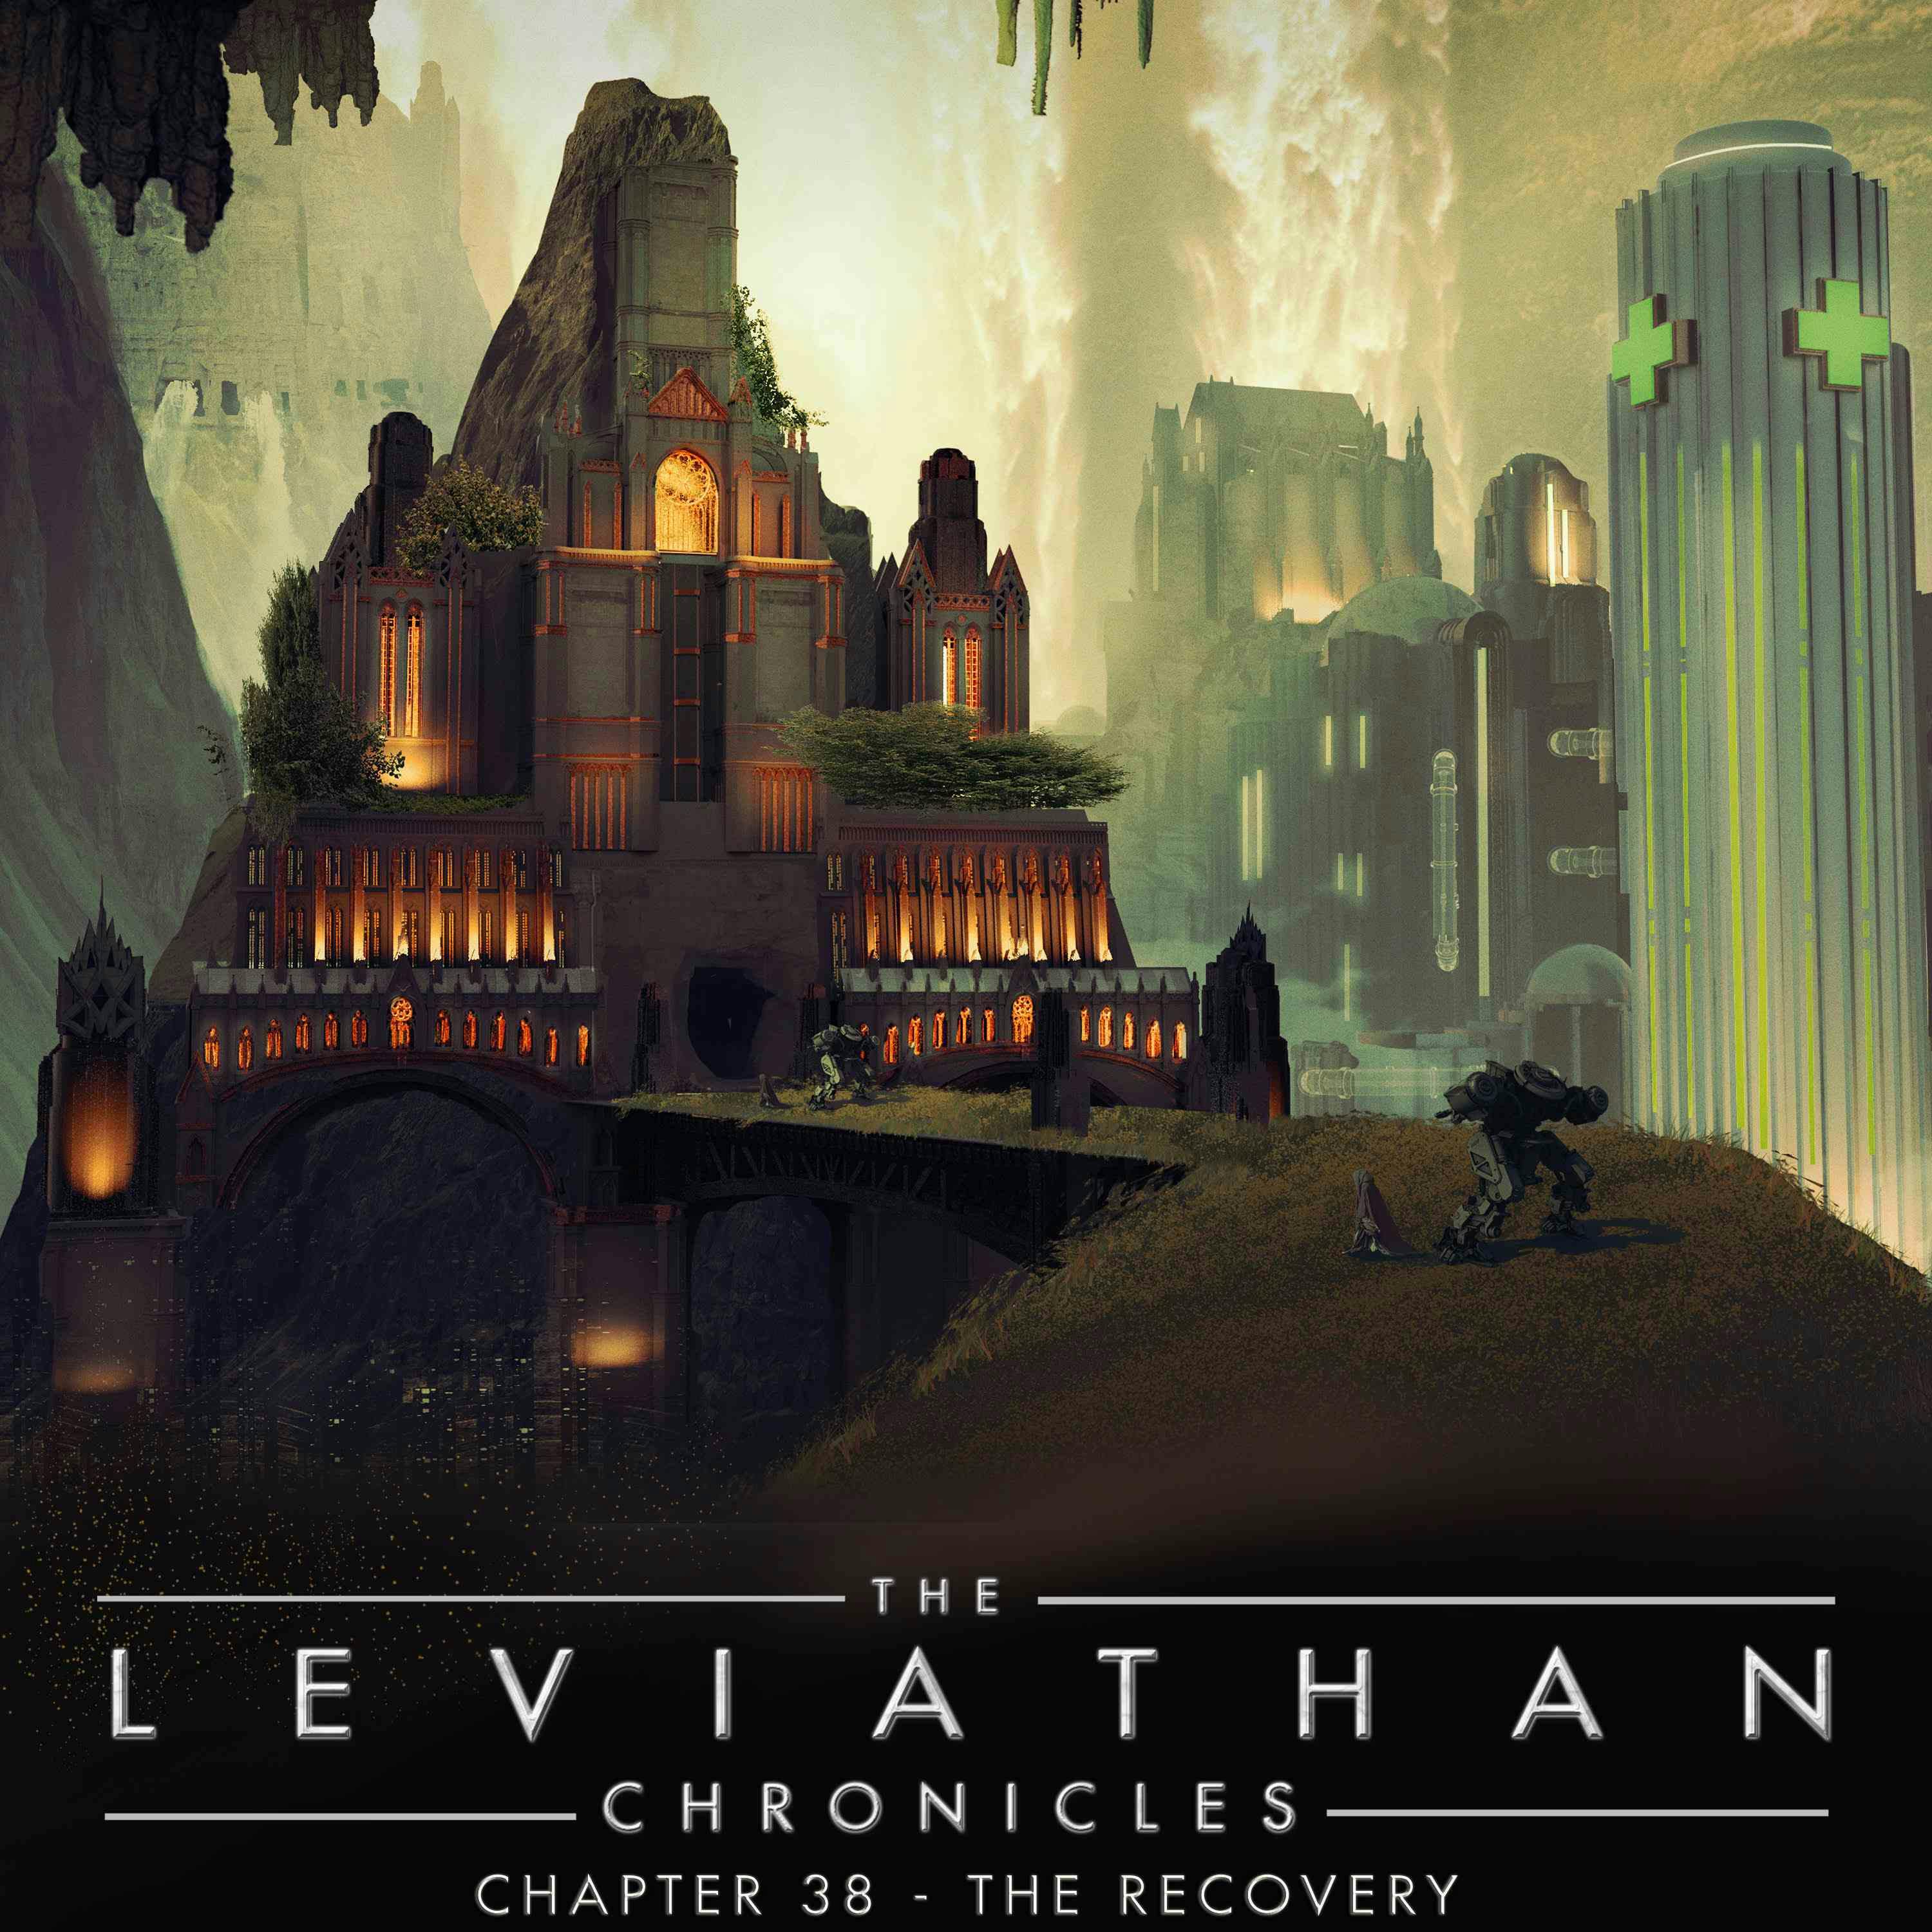 The Leviathan Chronicles | Chapter 38 - The Recovery